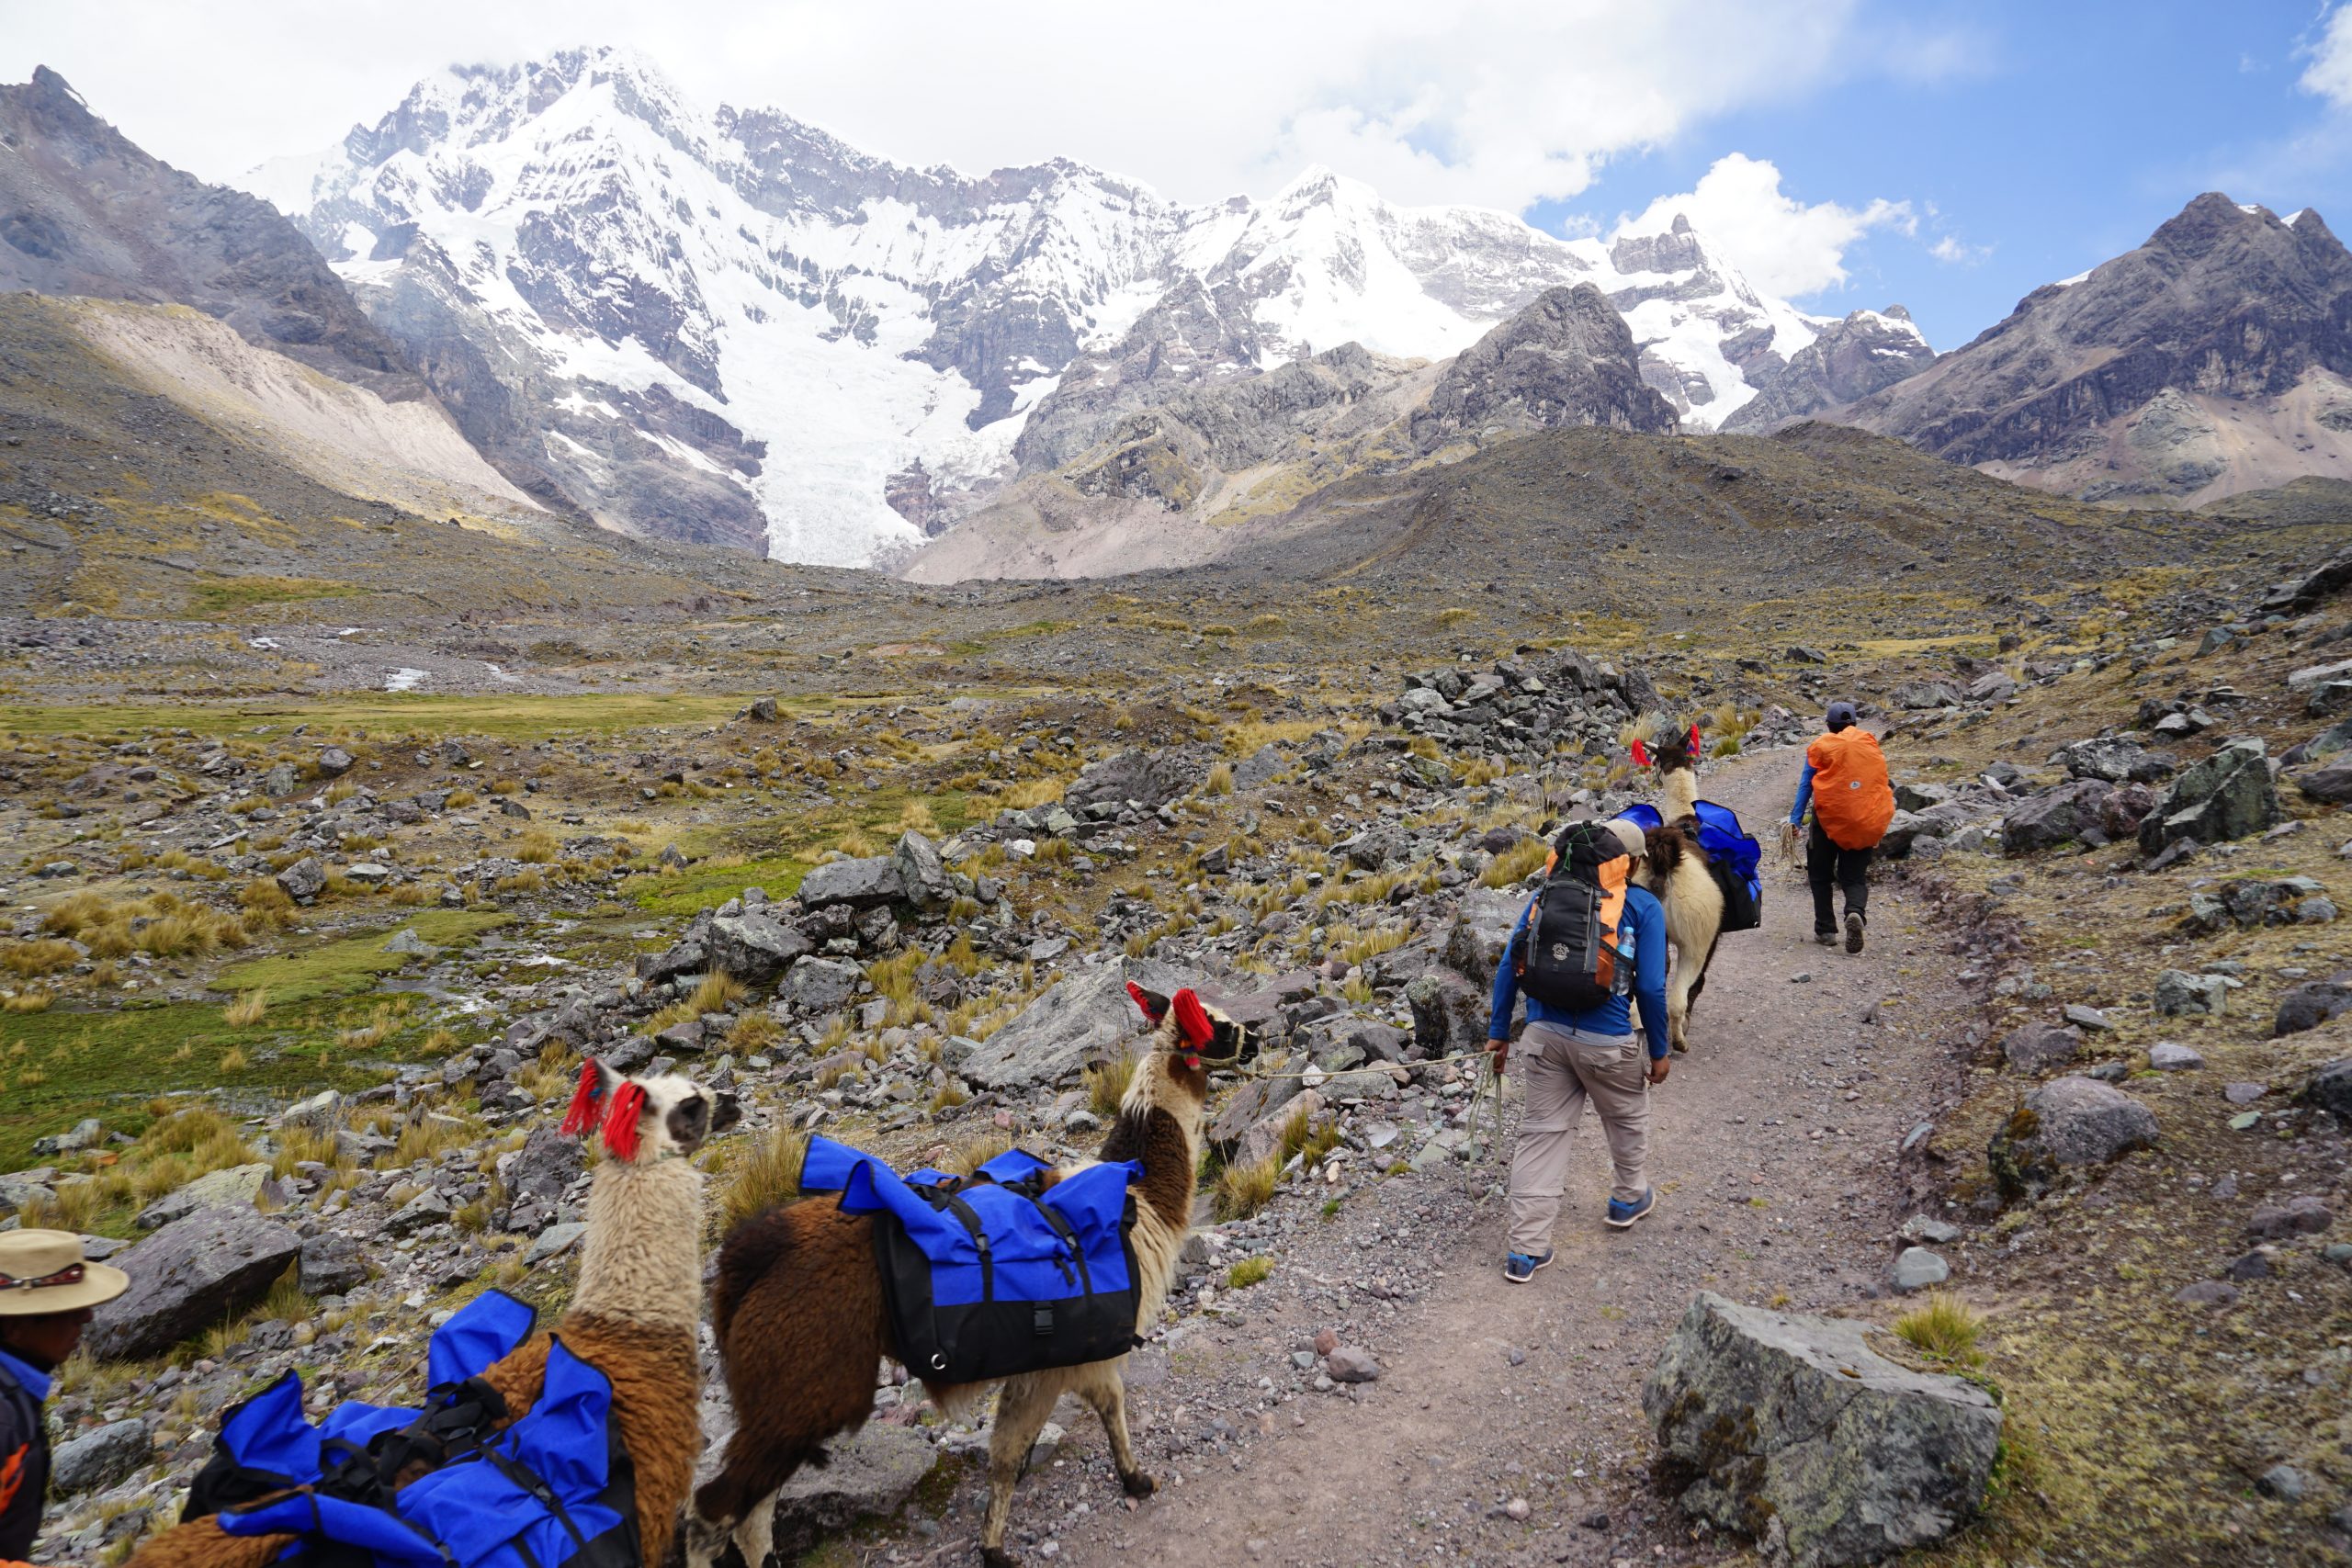 Wildland guides lead a herd of llamas on an adventure vacation trek in the Peruvian Andes.